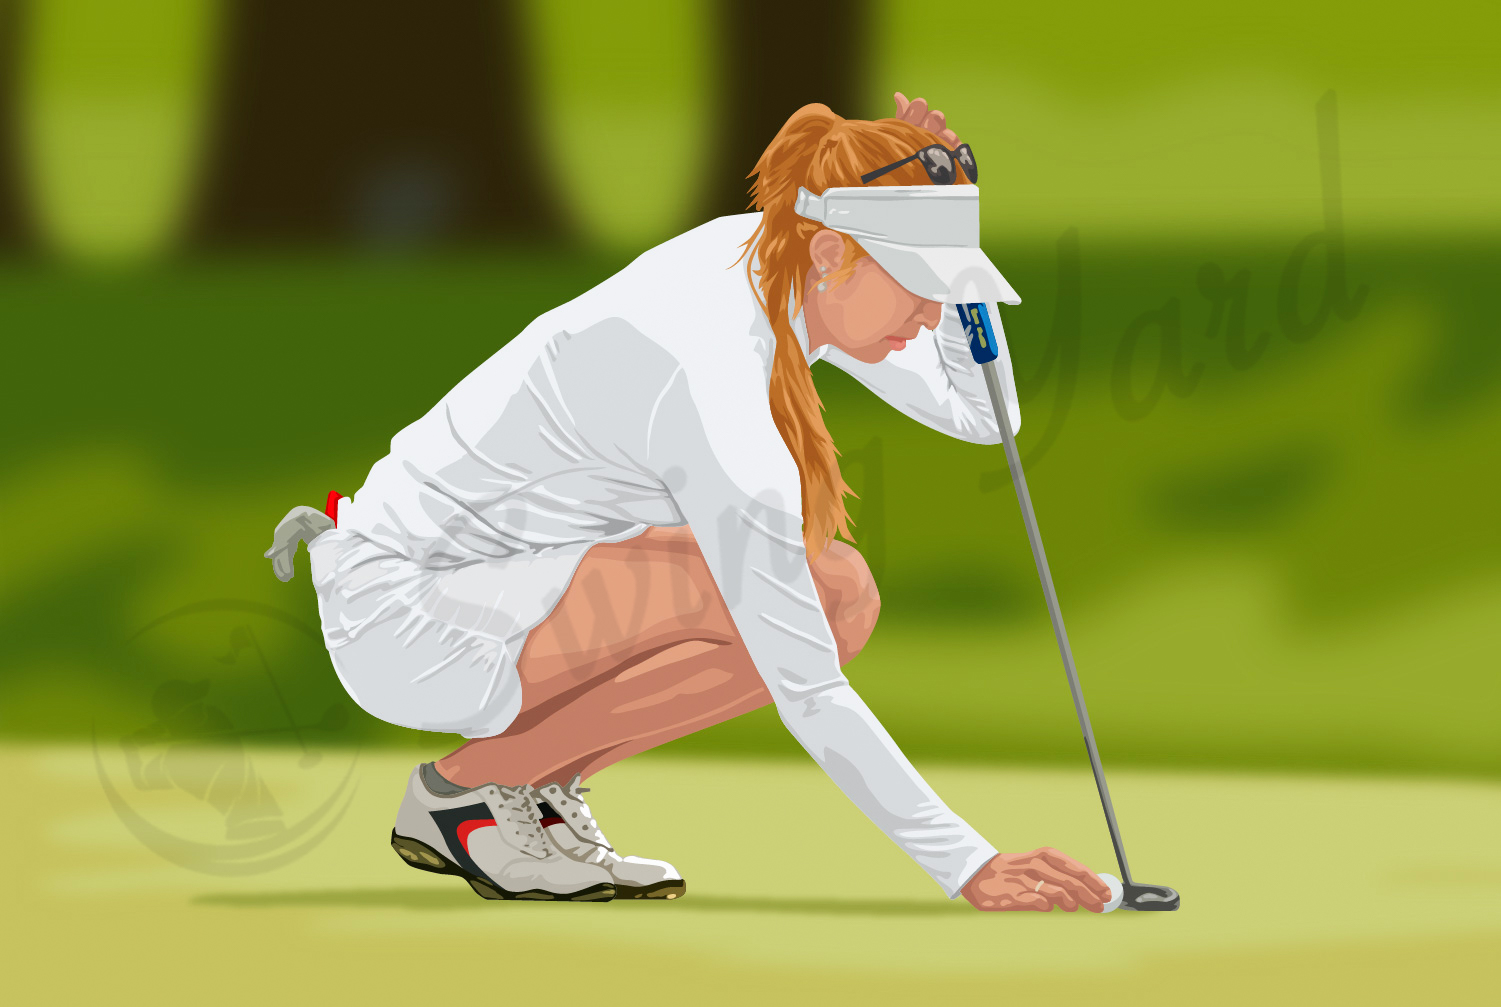 Woman golfer lining up a shot with her putter